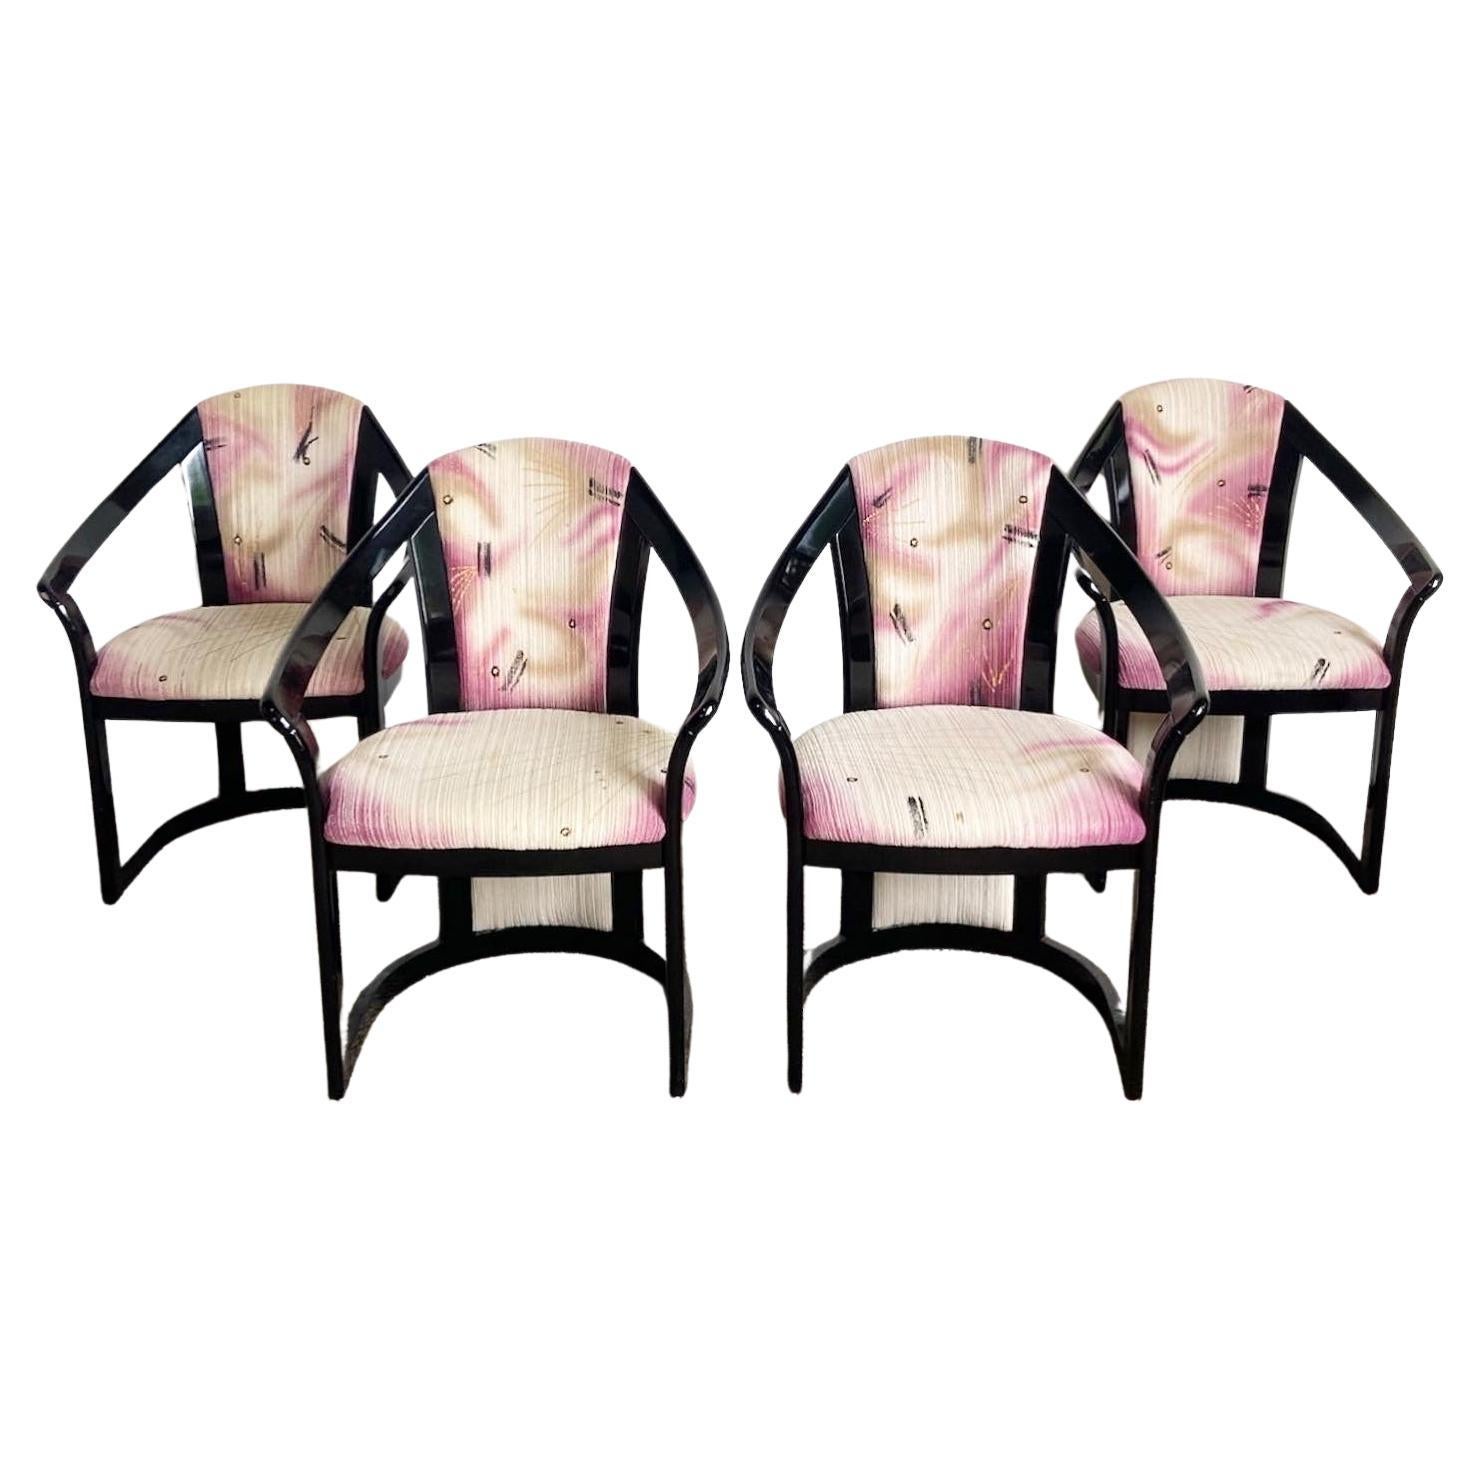 Italian Postmodern Black Lacquered and Pink Arm Chairs – Set of 4